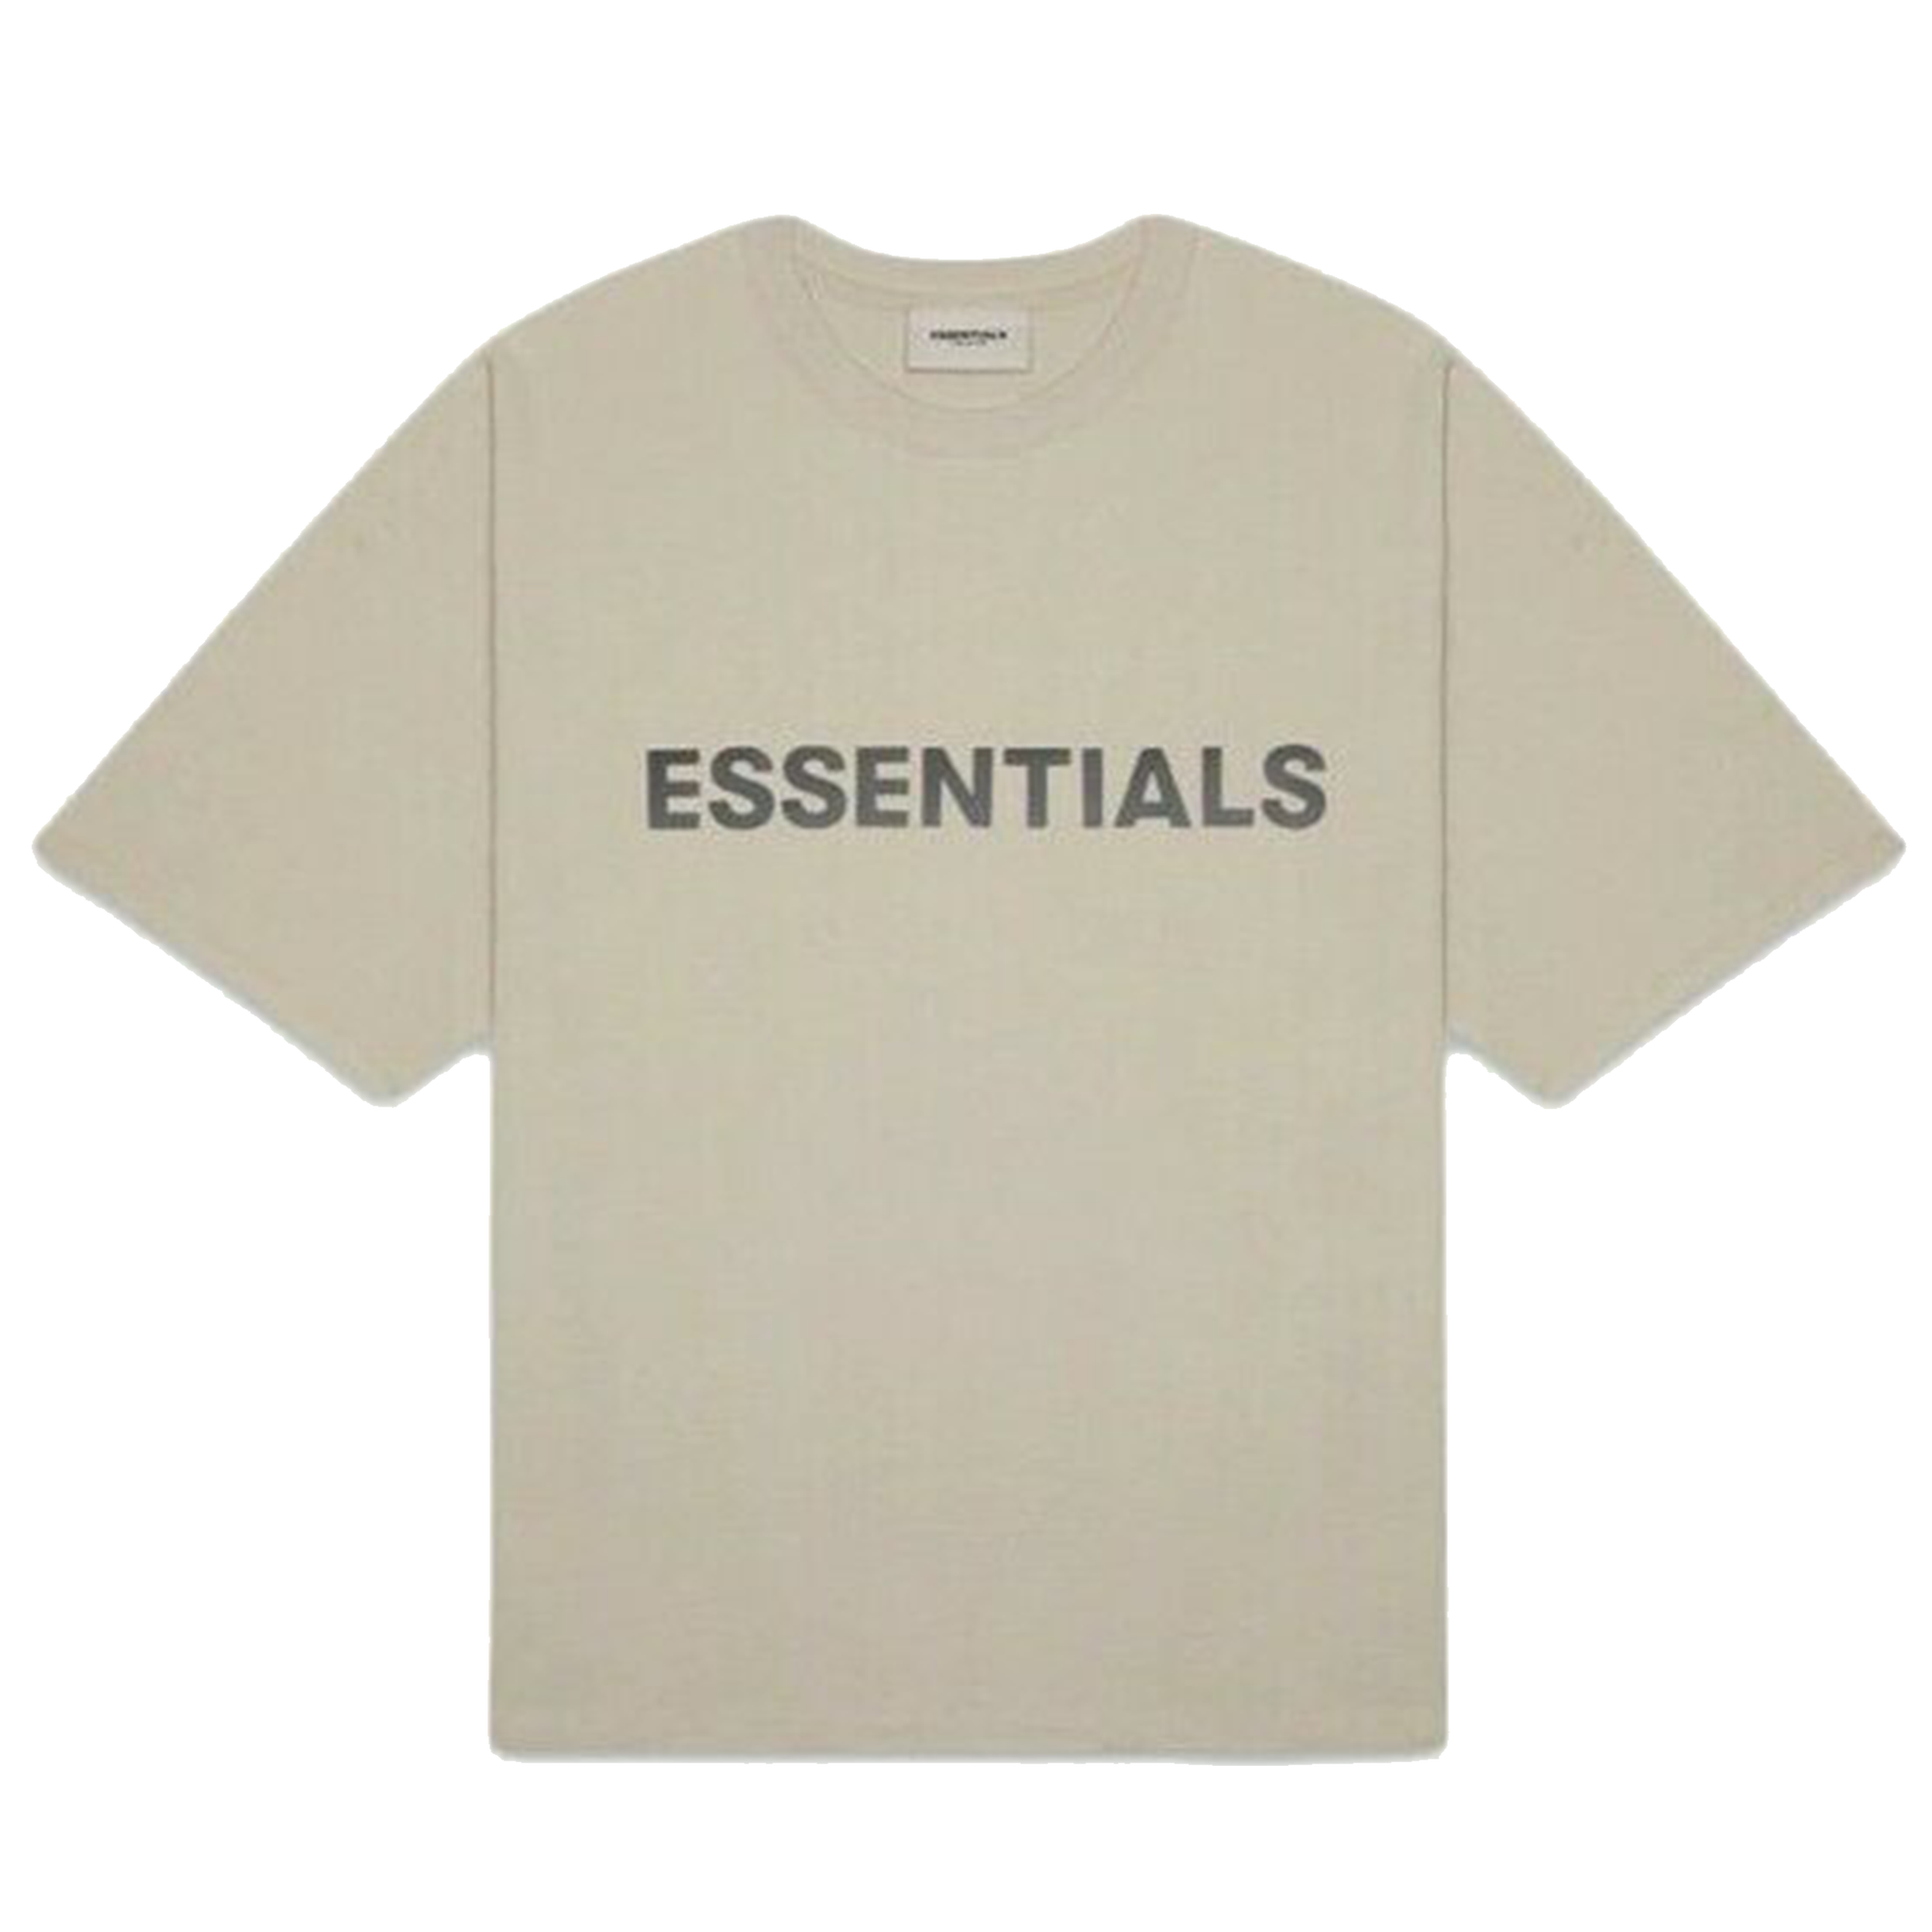 Essentials SS20 Tee Olive